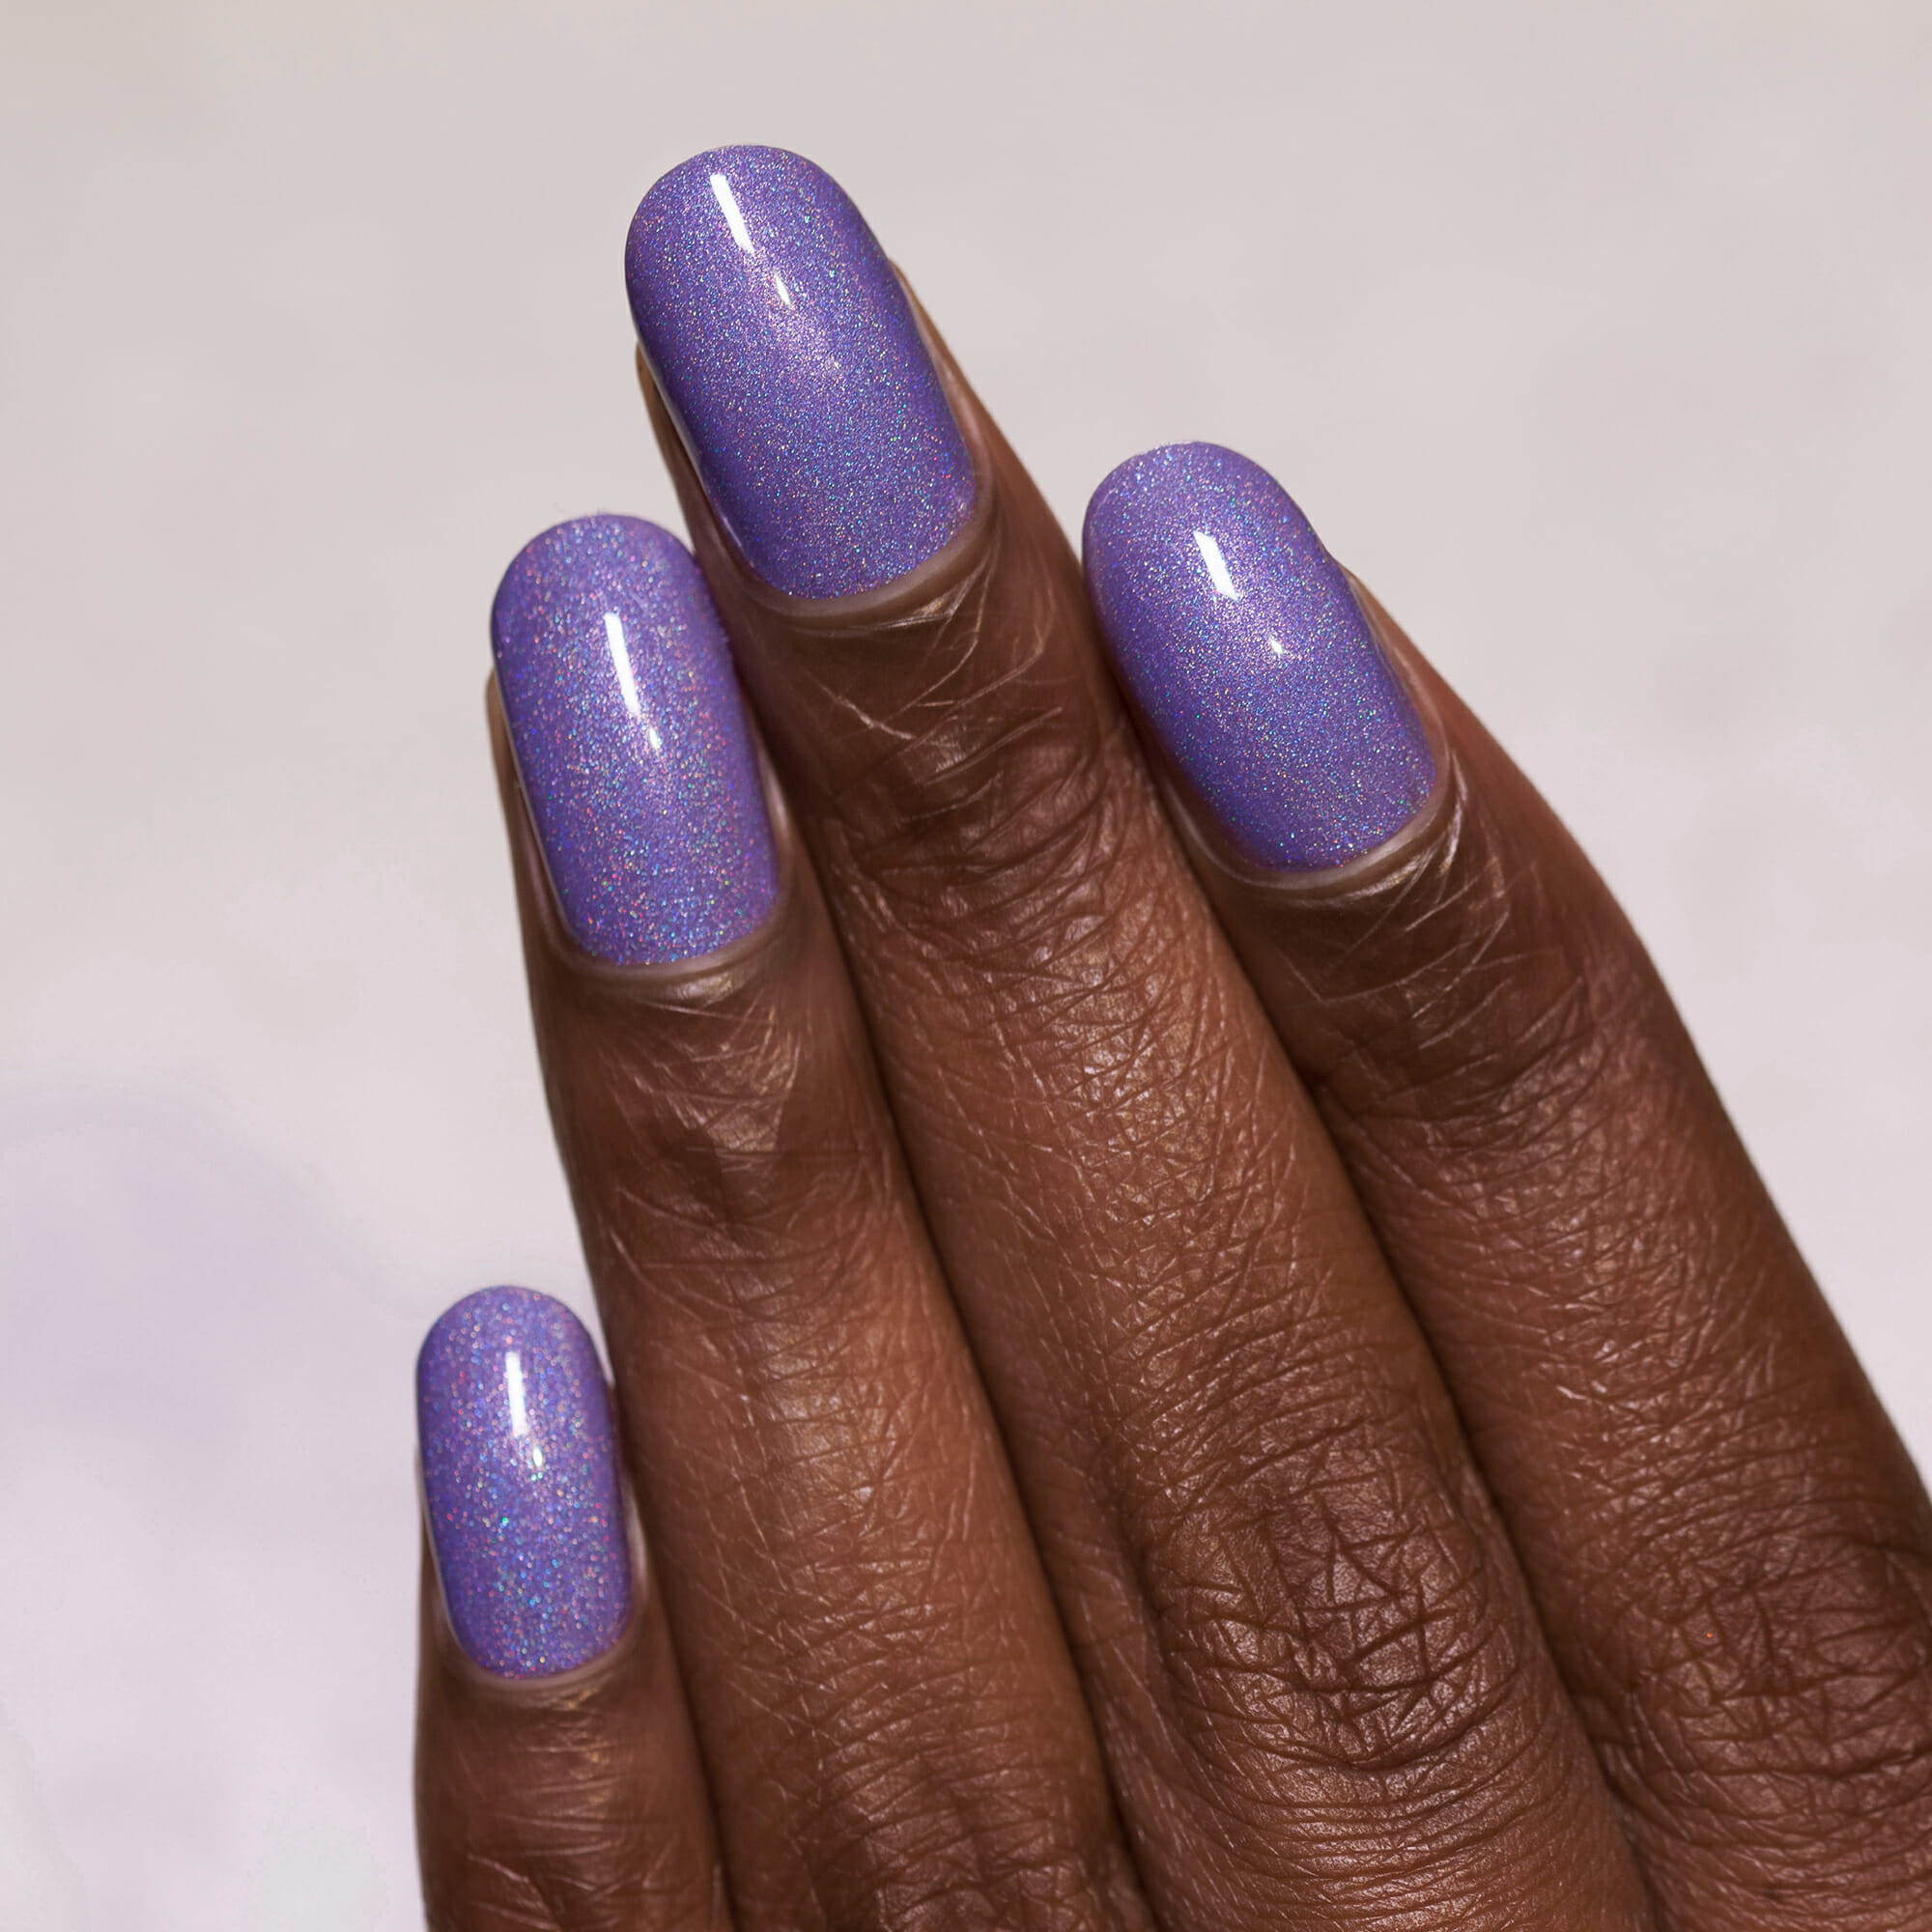 Charmingly Purple - Bright Purple Holographic Nail Polish by ILNP